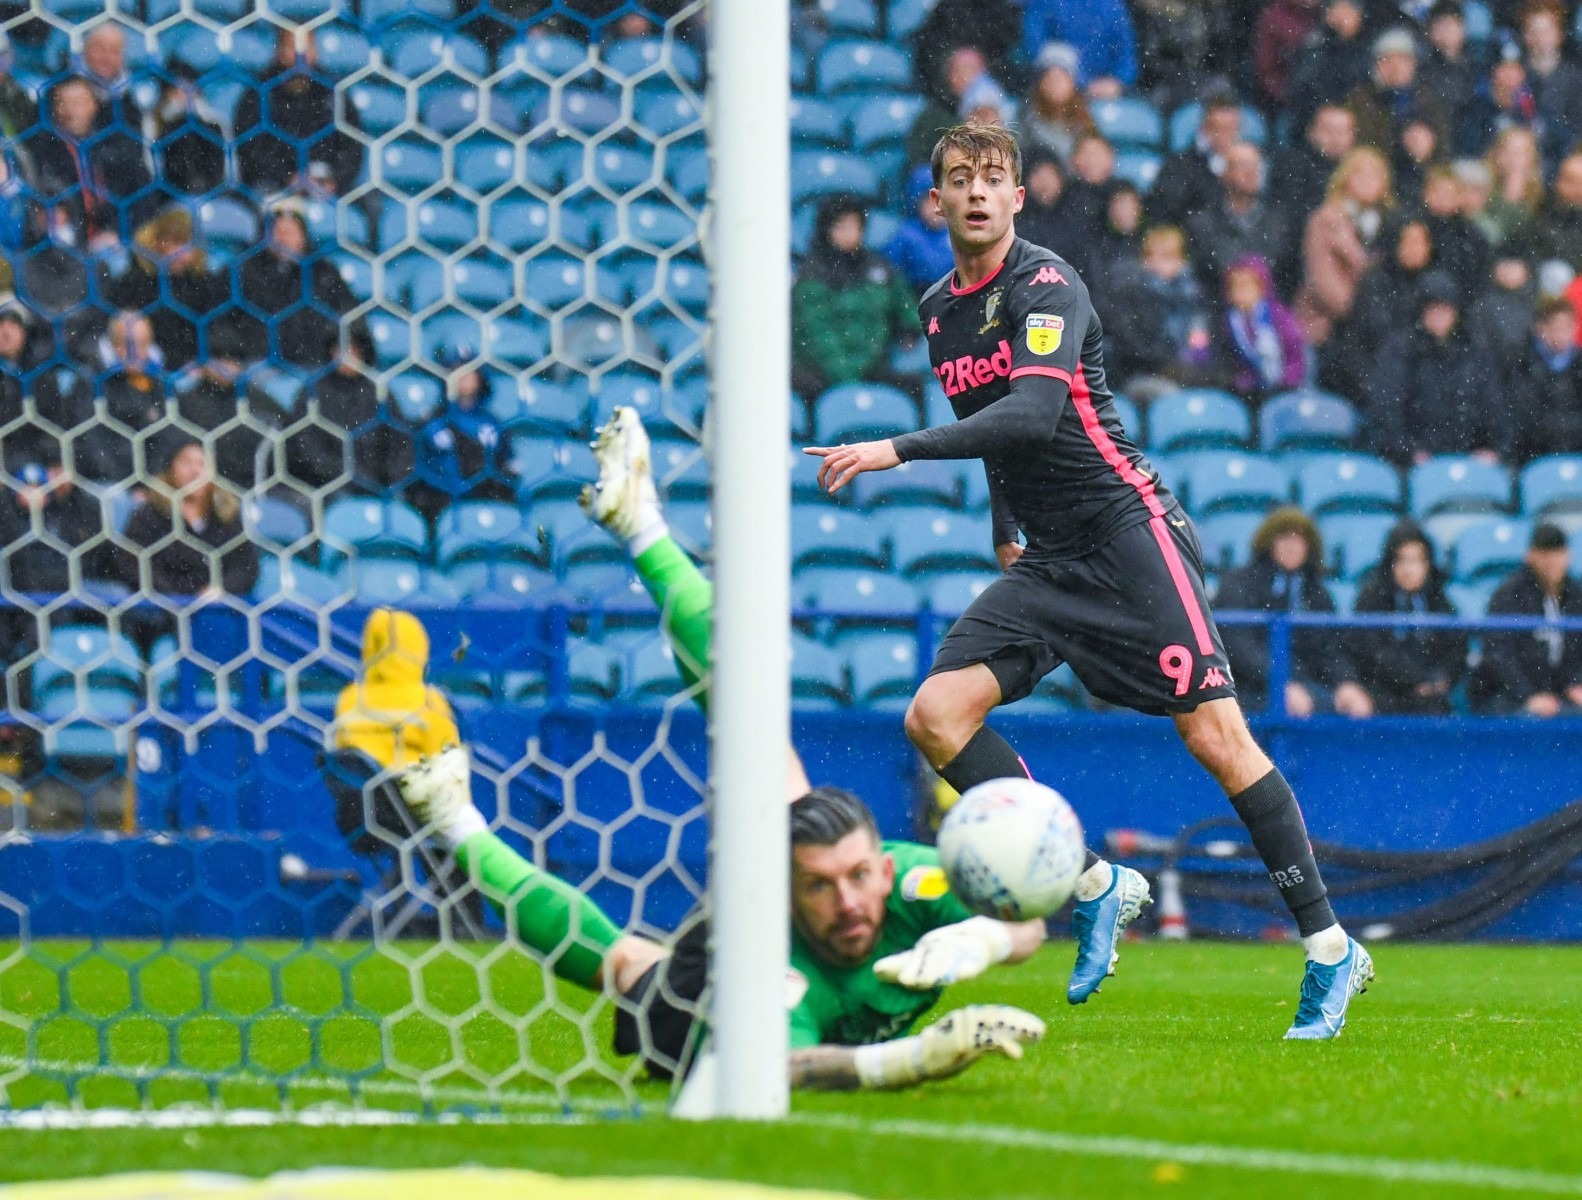 , Sheff Weds 0 Leeds 0: Leeds fans rage as Owls goalkeeper Westwood has typical performance against them in 0-0 draw